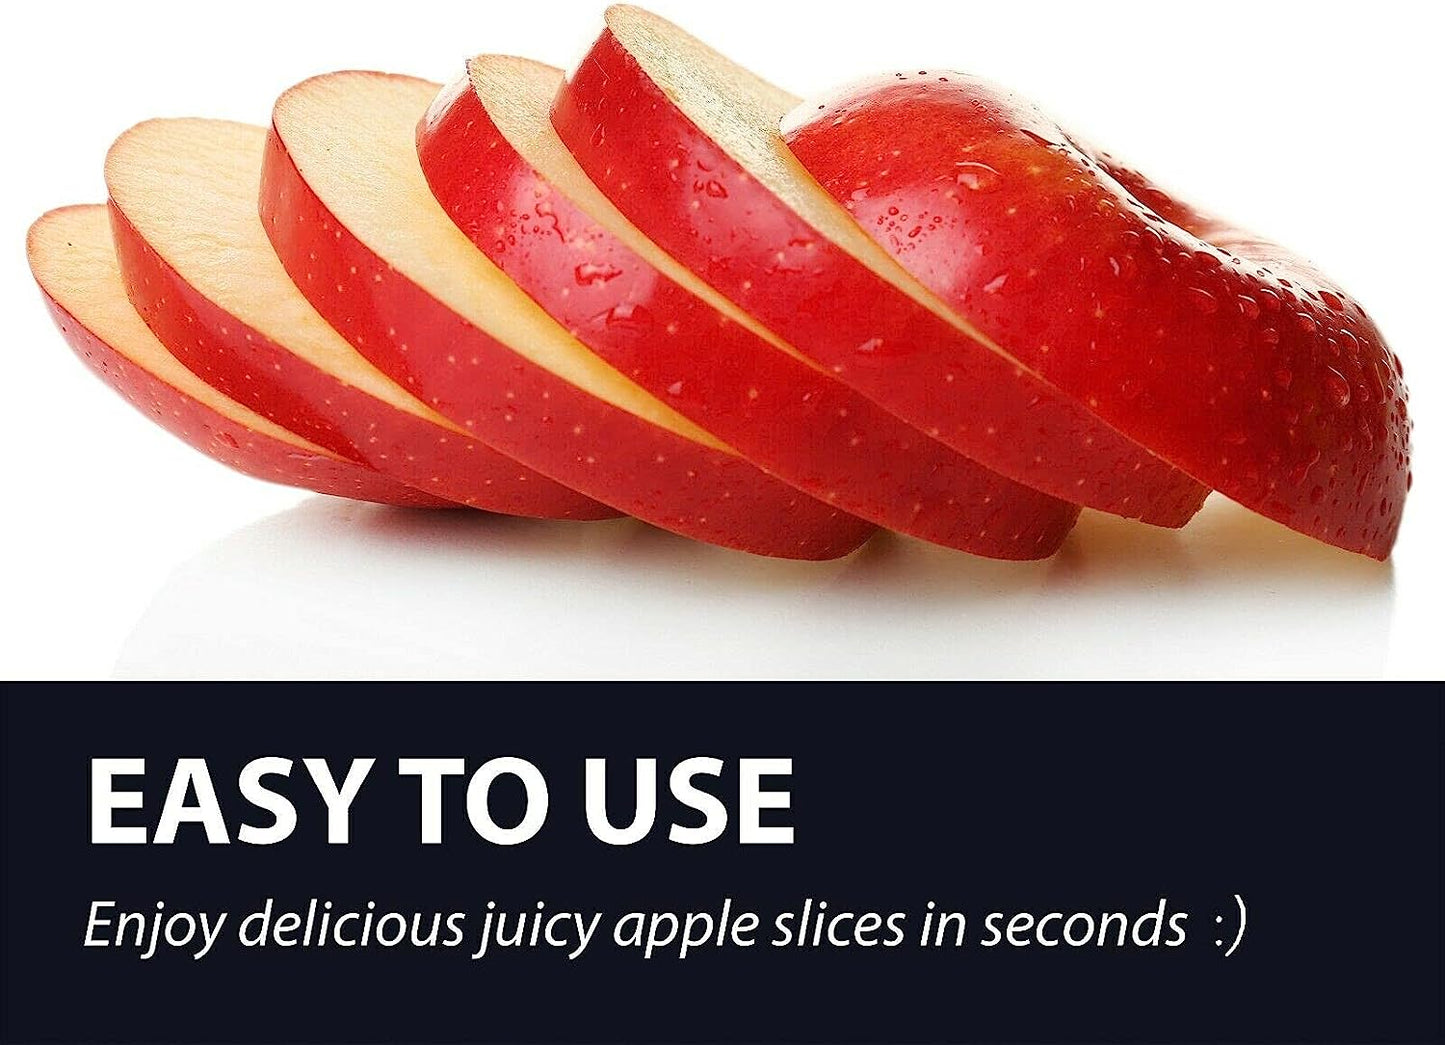 Premium Stainless Steel Durable Apple Corer - Easy to Use Kitchen Gadget